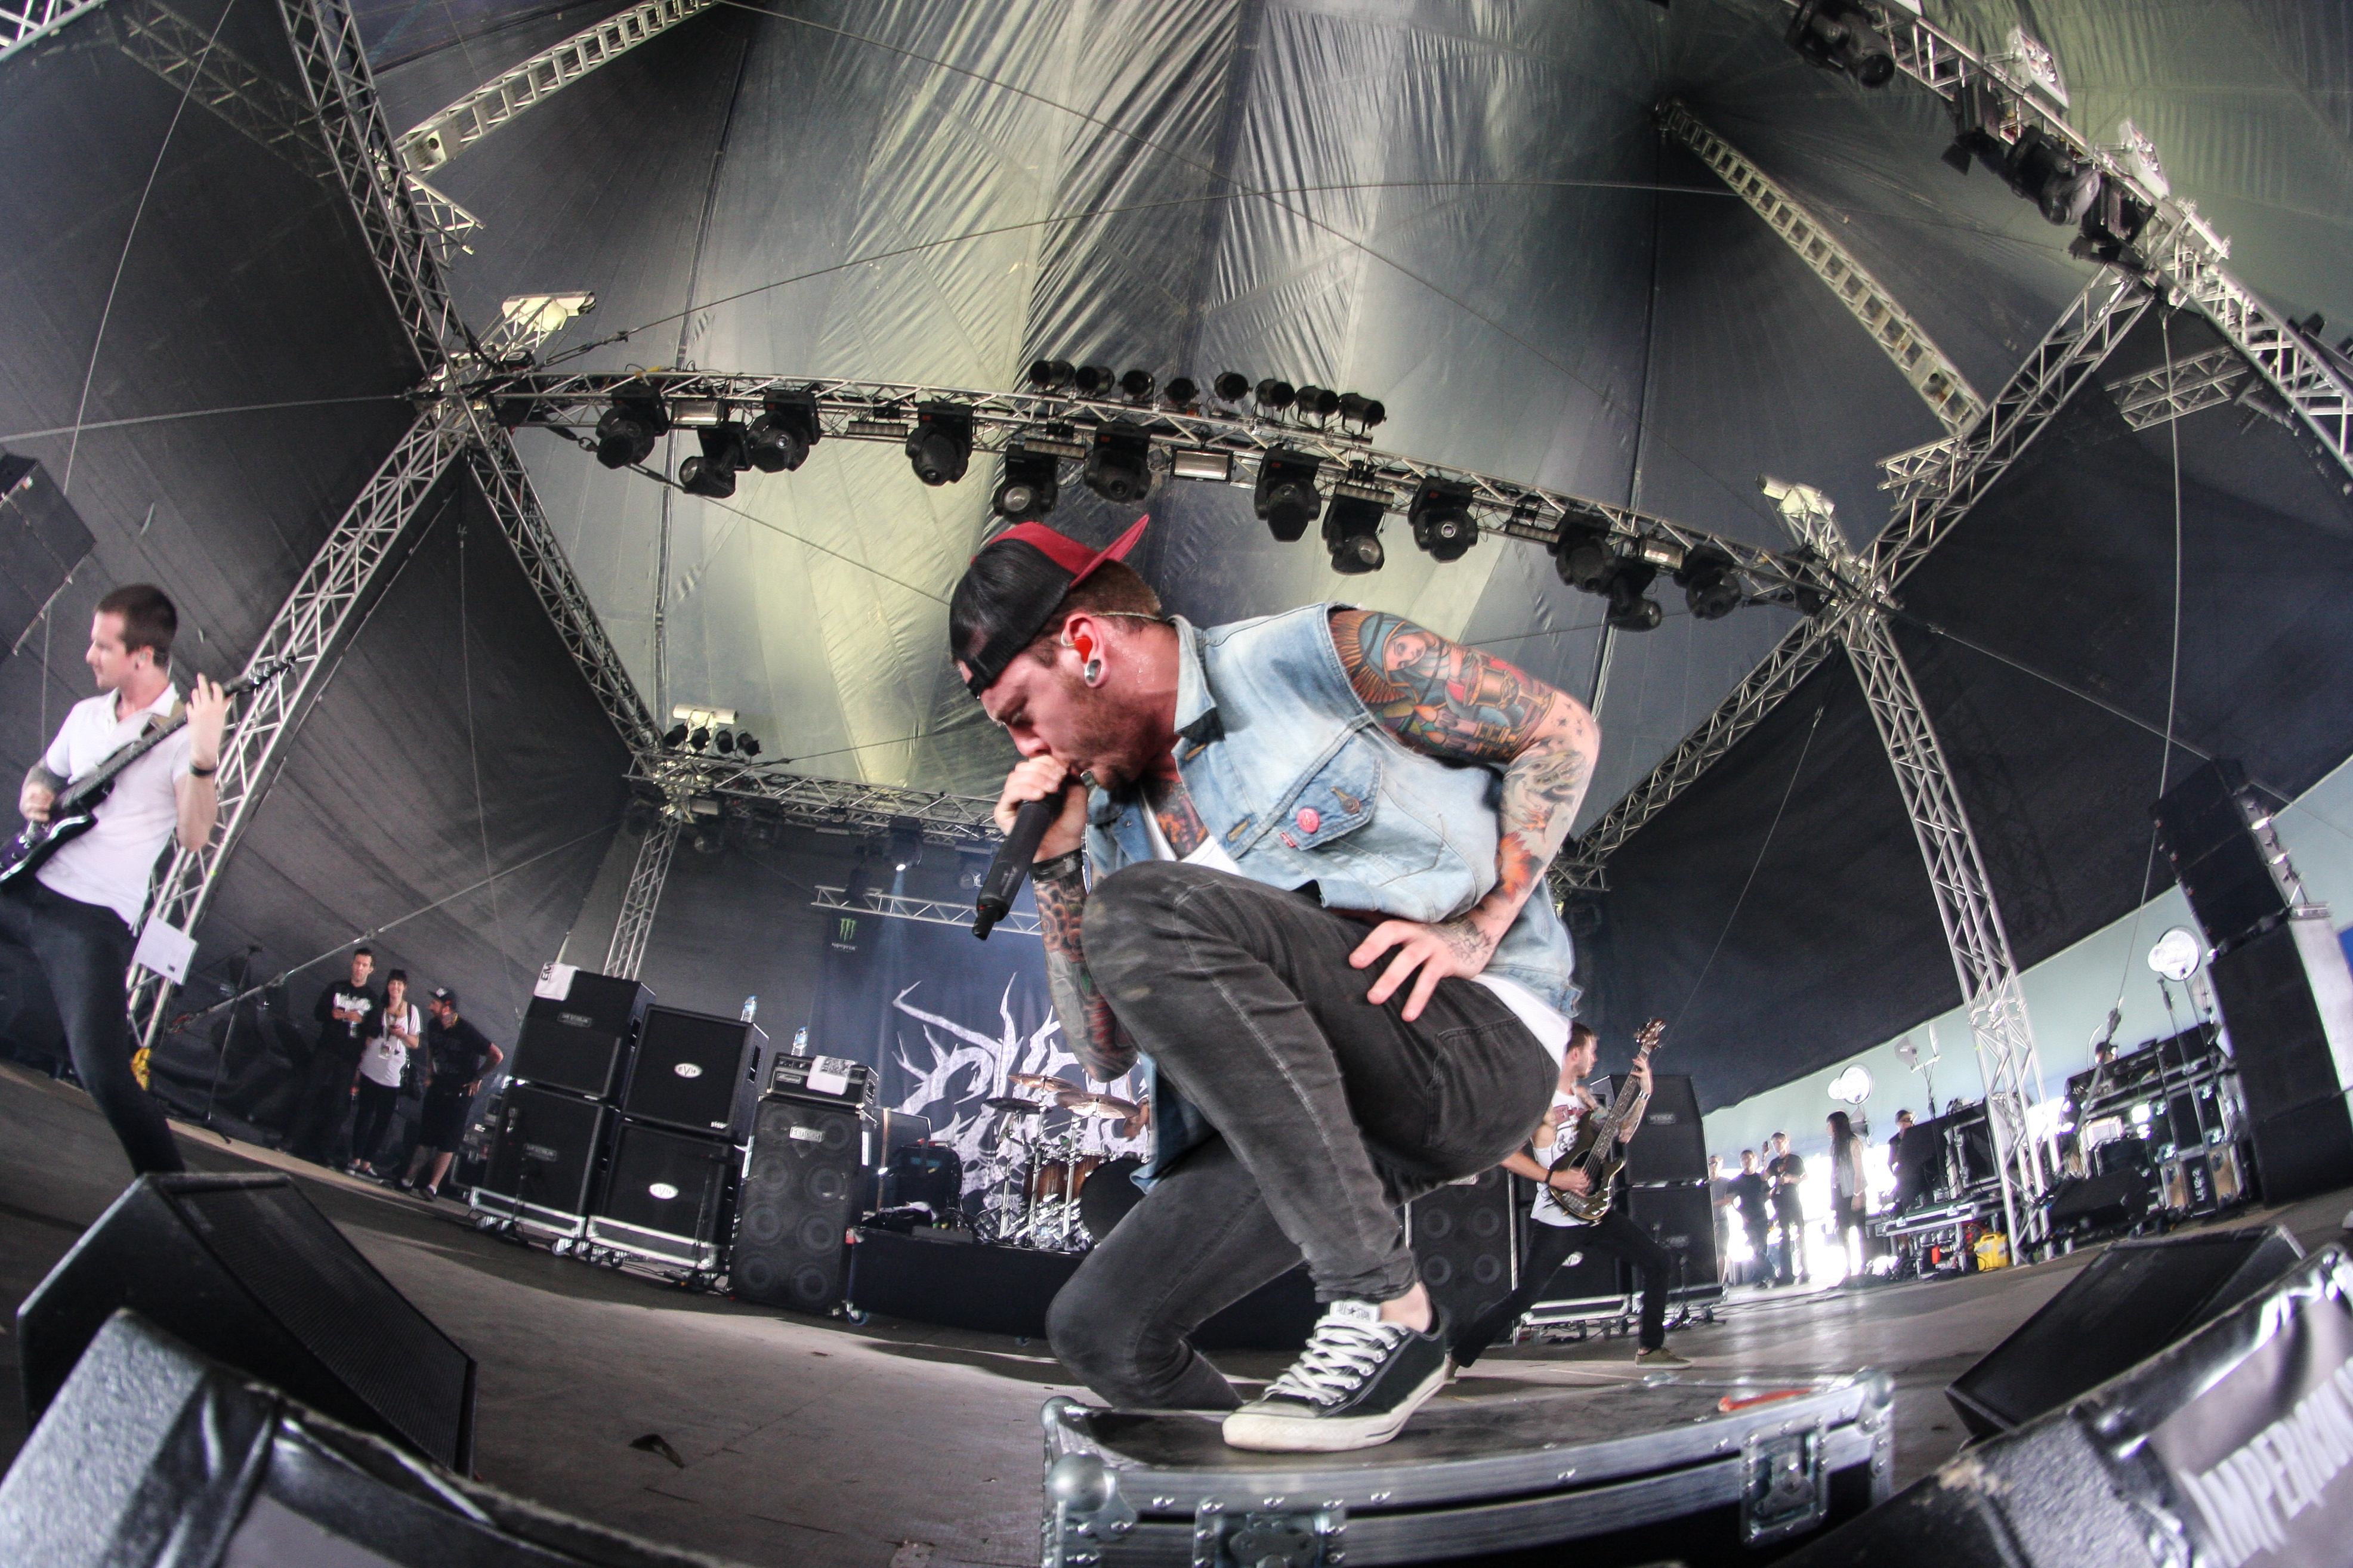 chelsea grin wallpaper,performance,photography,musician,performing arts,stage